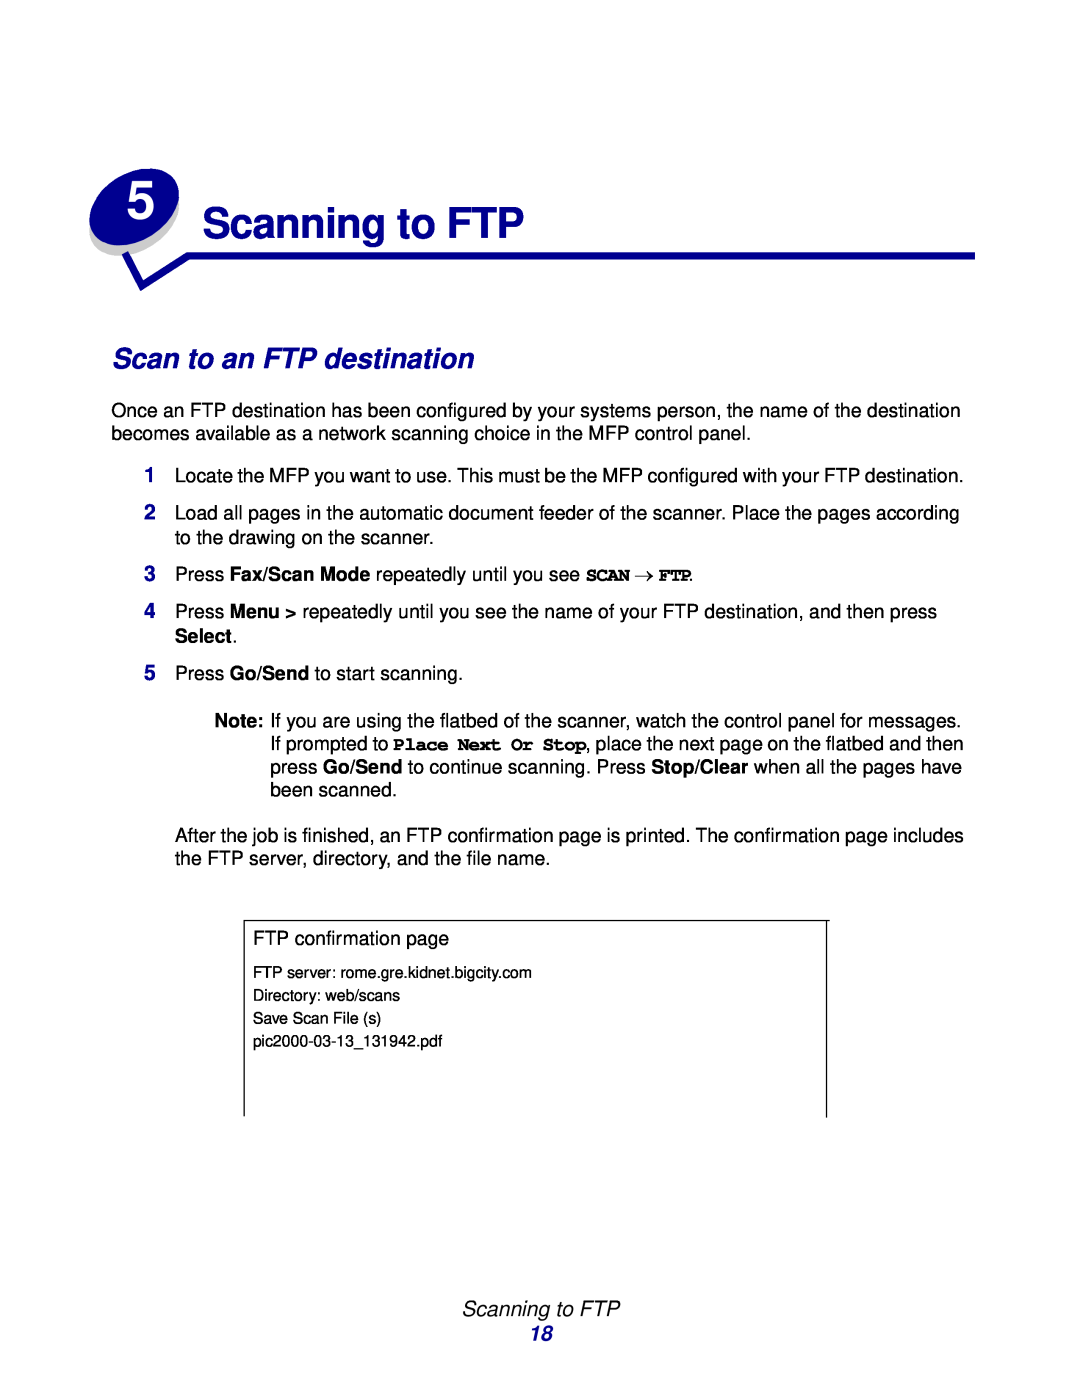 Lexmark 3200 manual Scan to an FTP destination, Scanning to FTP 